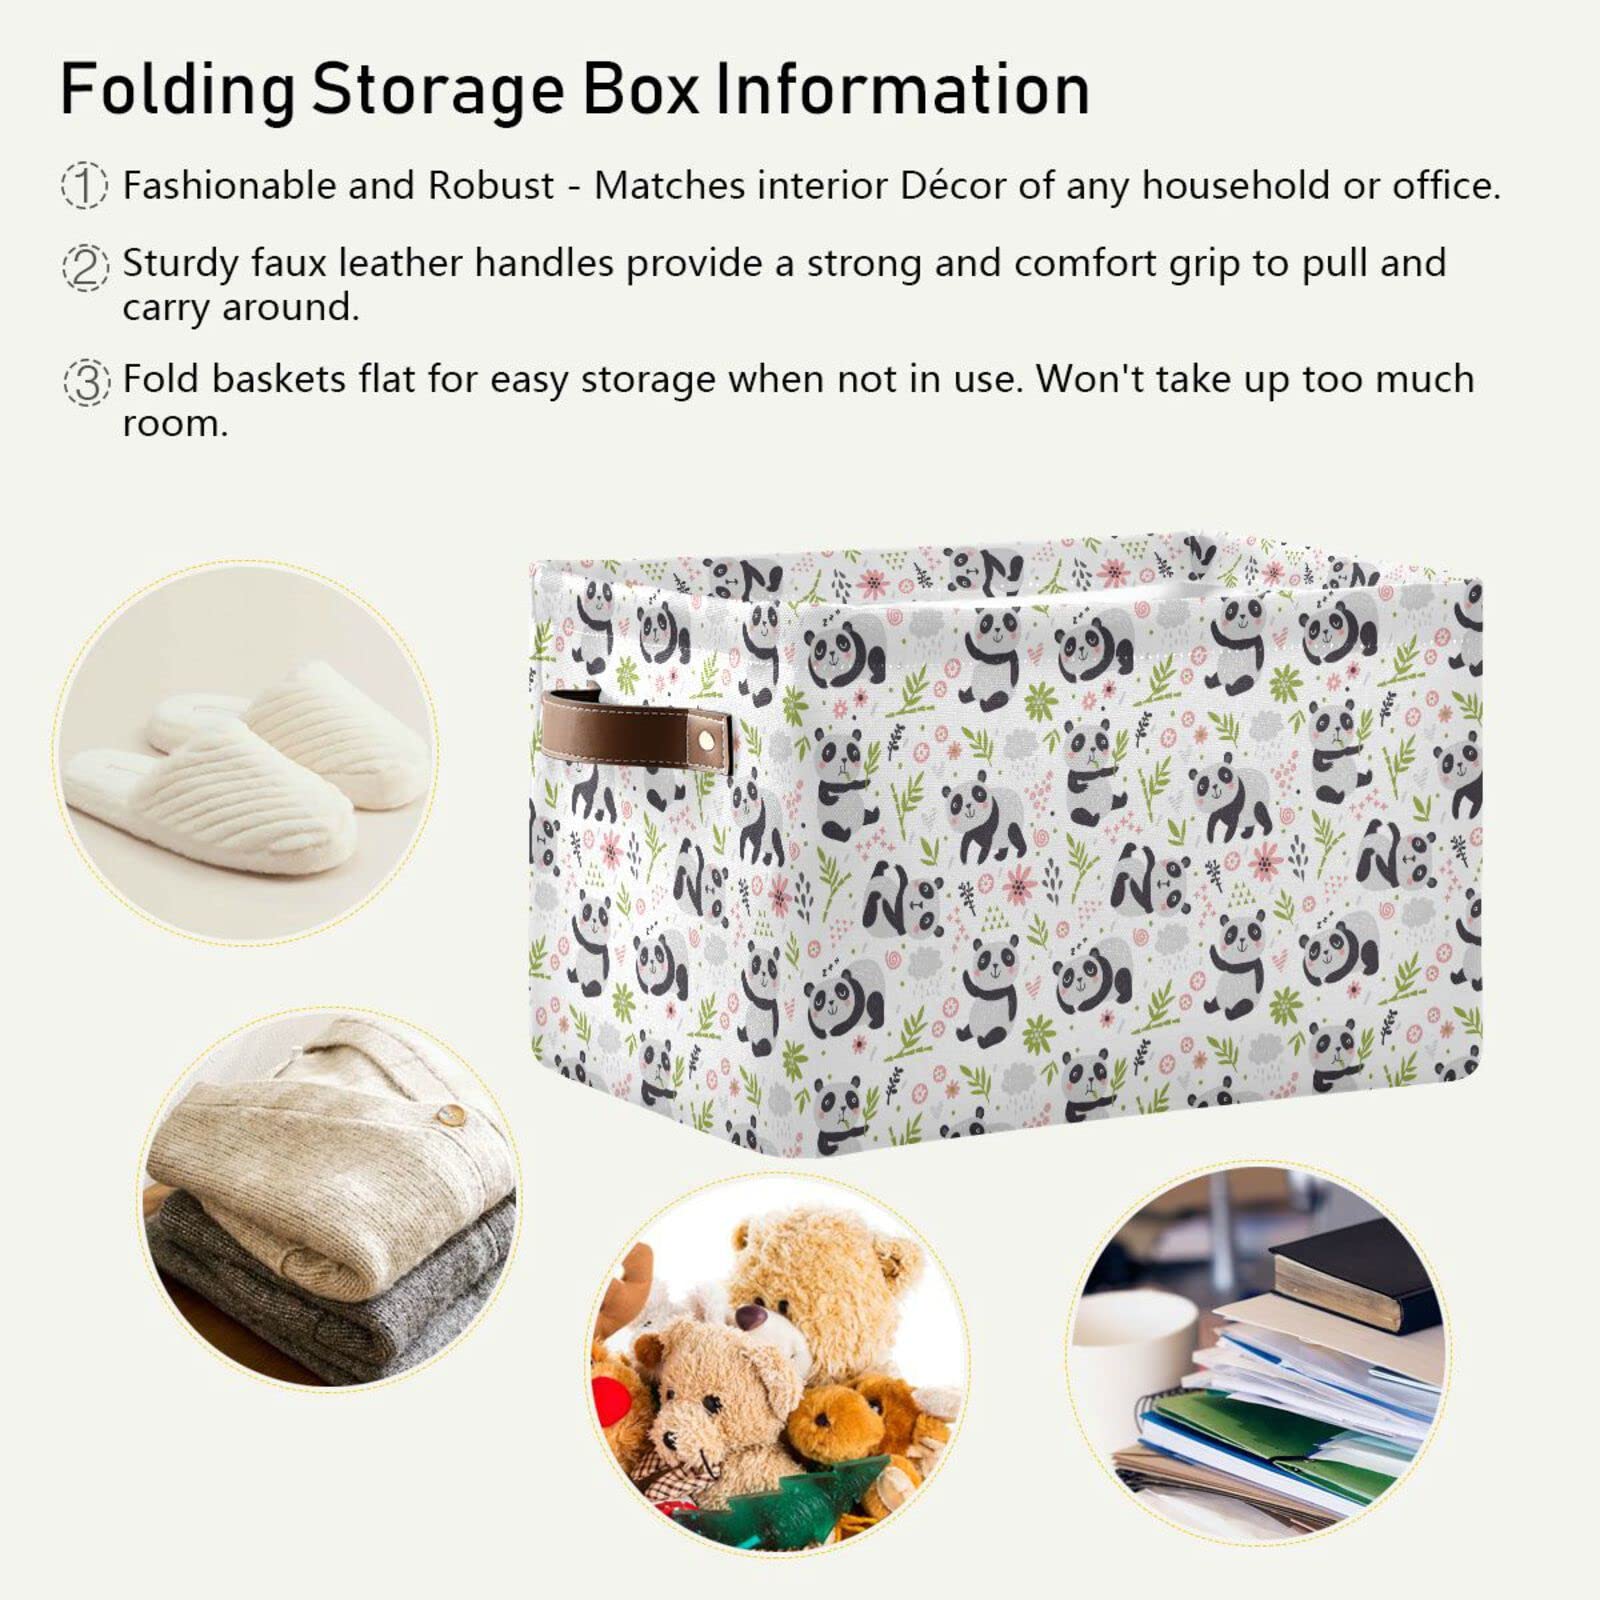 Kigai Panda Eating Bamboo Storage Baskets Rectangle Foldable Canvas Fabric Organizer Storage Boxes with Handles for Home Office Decorative Closet Shelves Clothes Storage